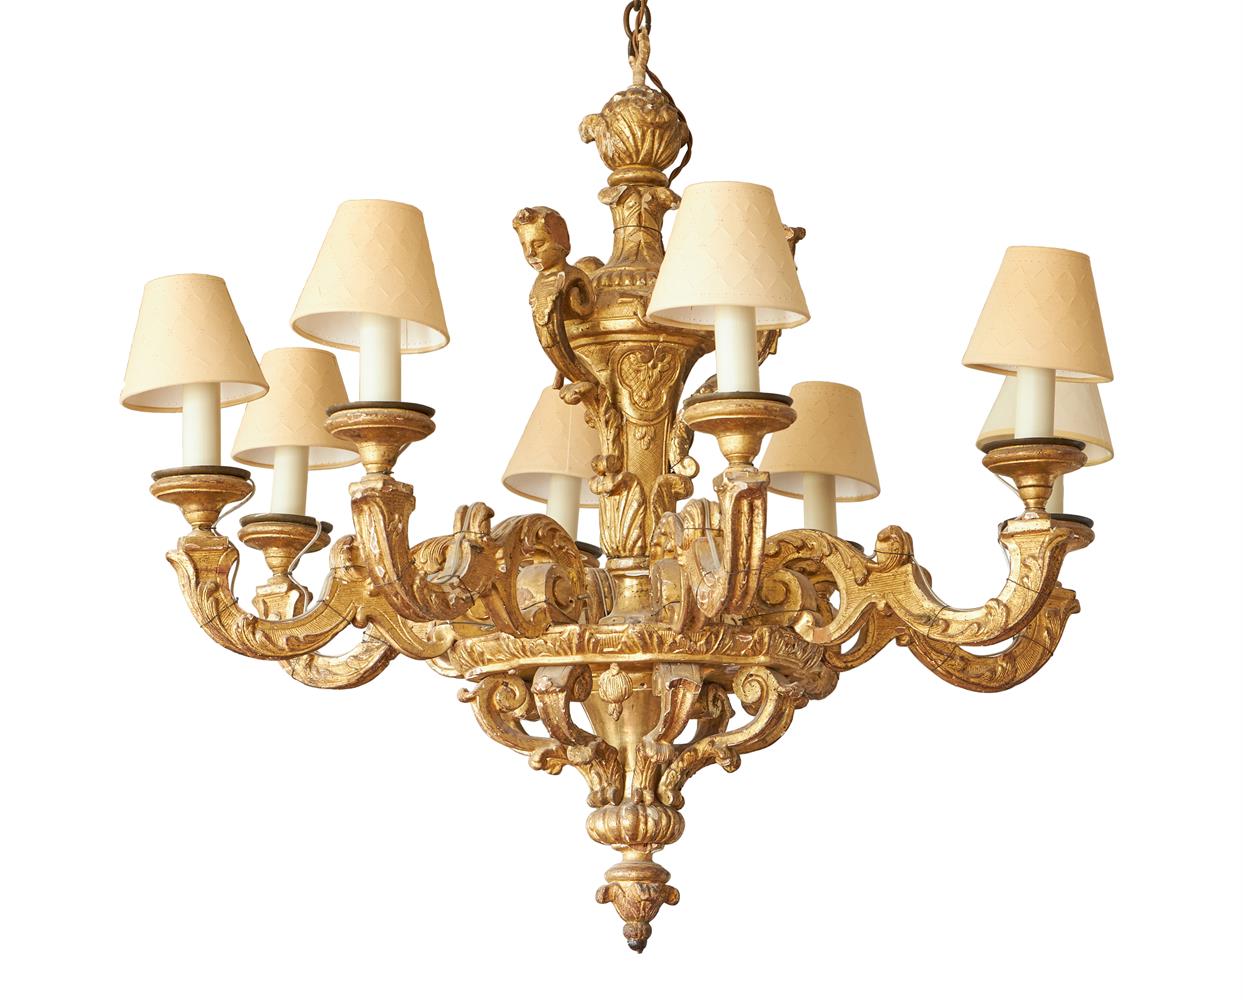 A CARVED GILTWOOD EIGHT LIGHT CHANDELIER FRENCH, AFTER ANDRE-CHARLES BOULLE, EARLY 18TH CENTURY - Image 2 of 5